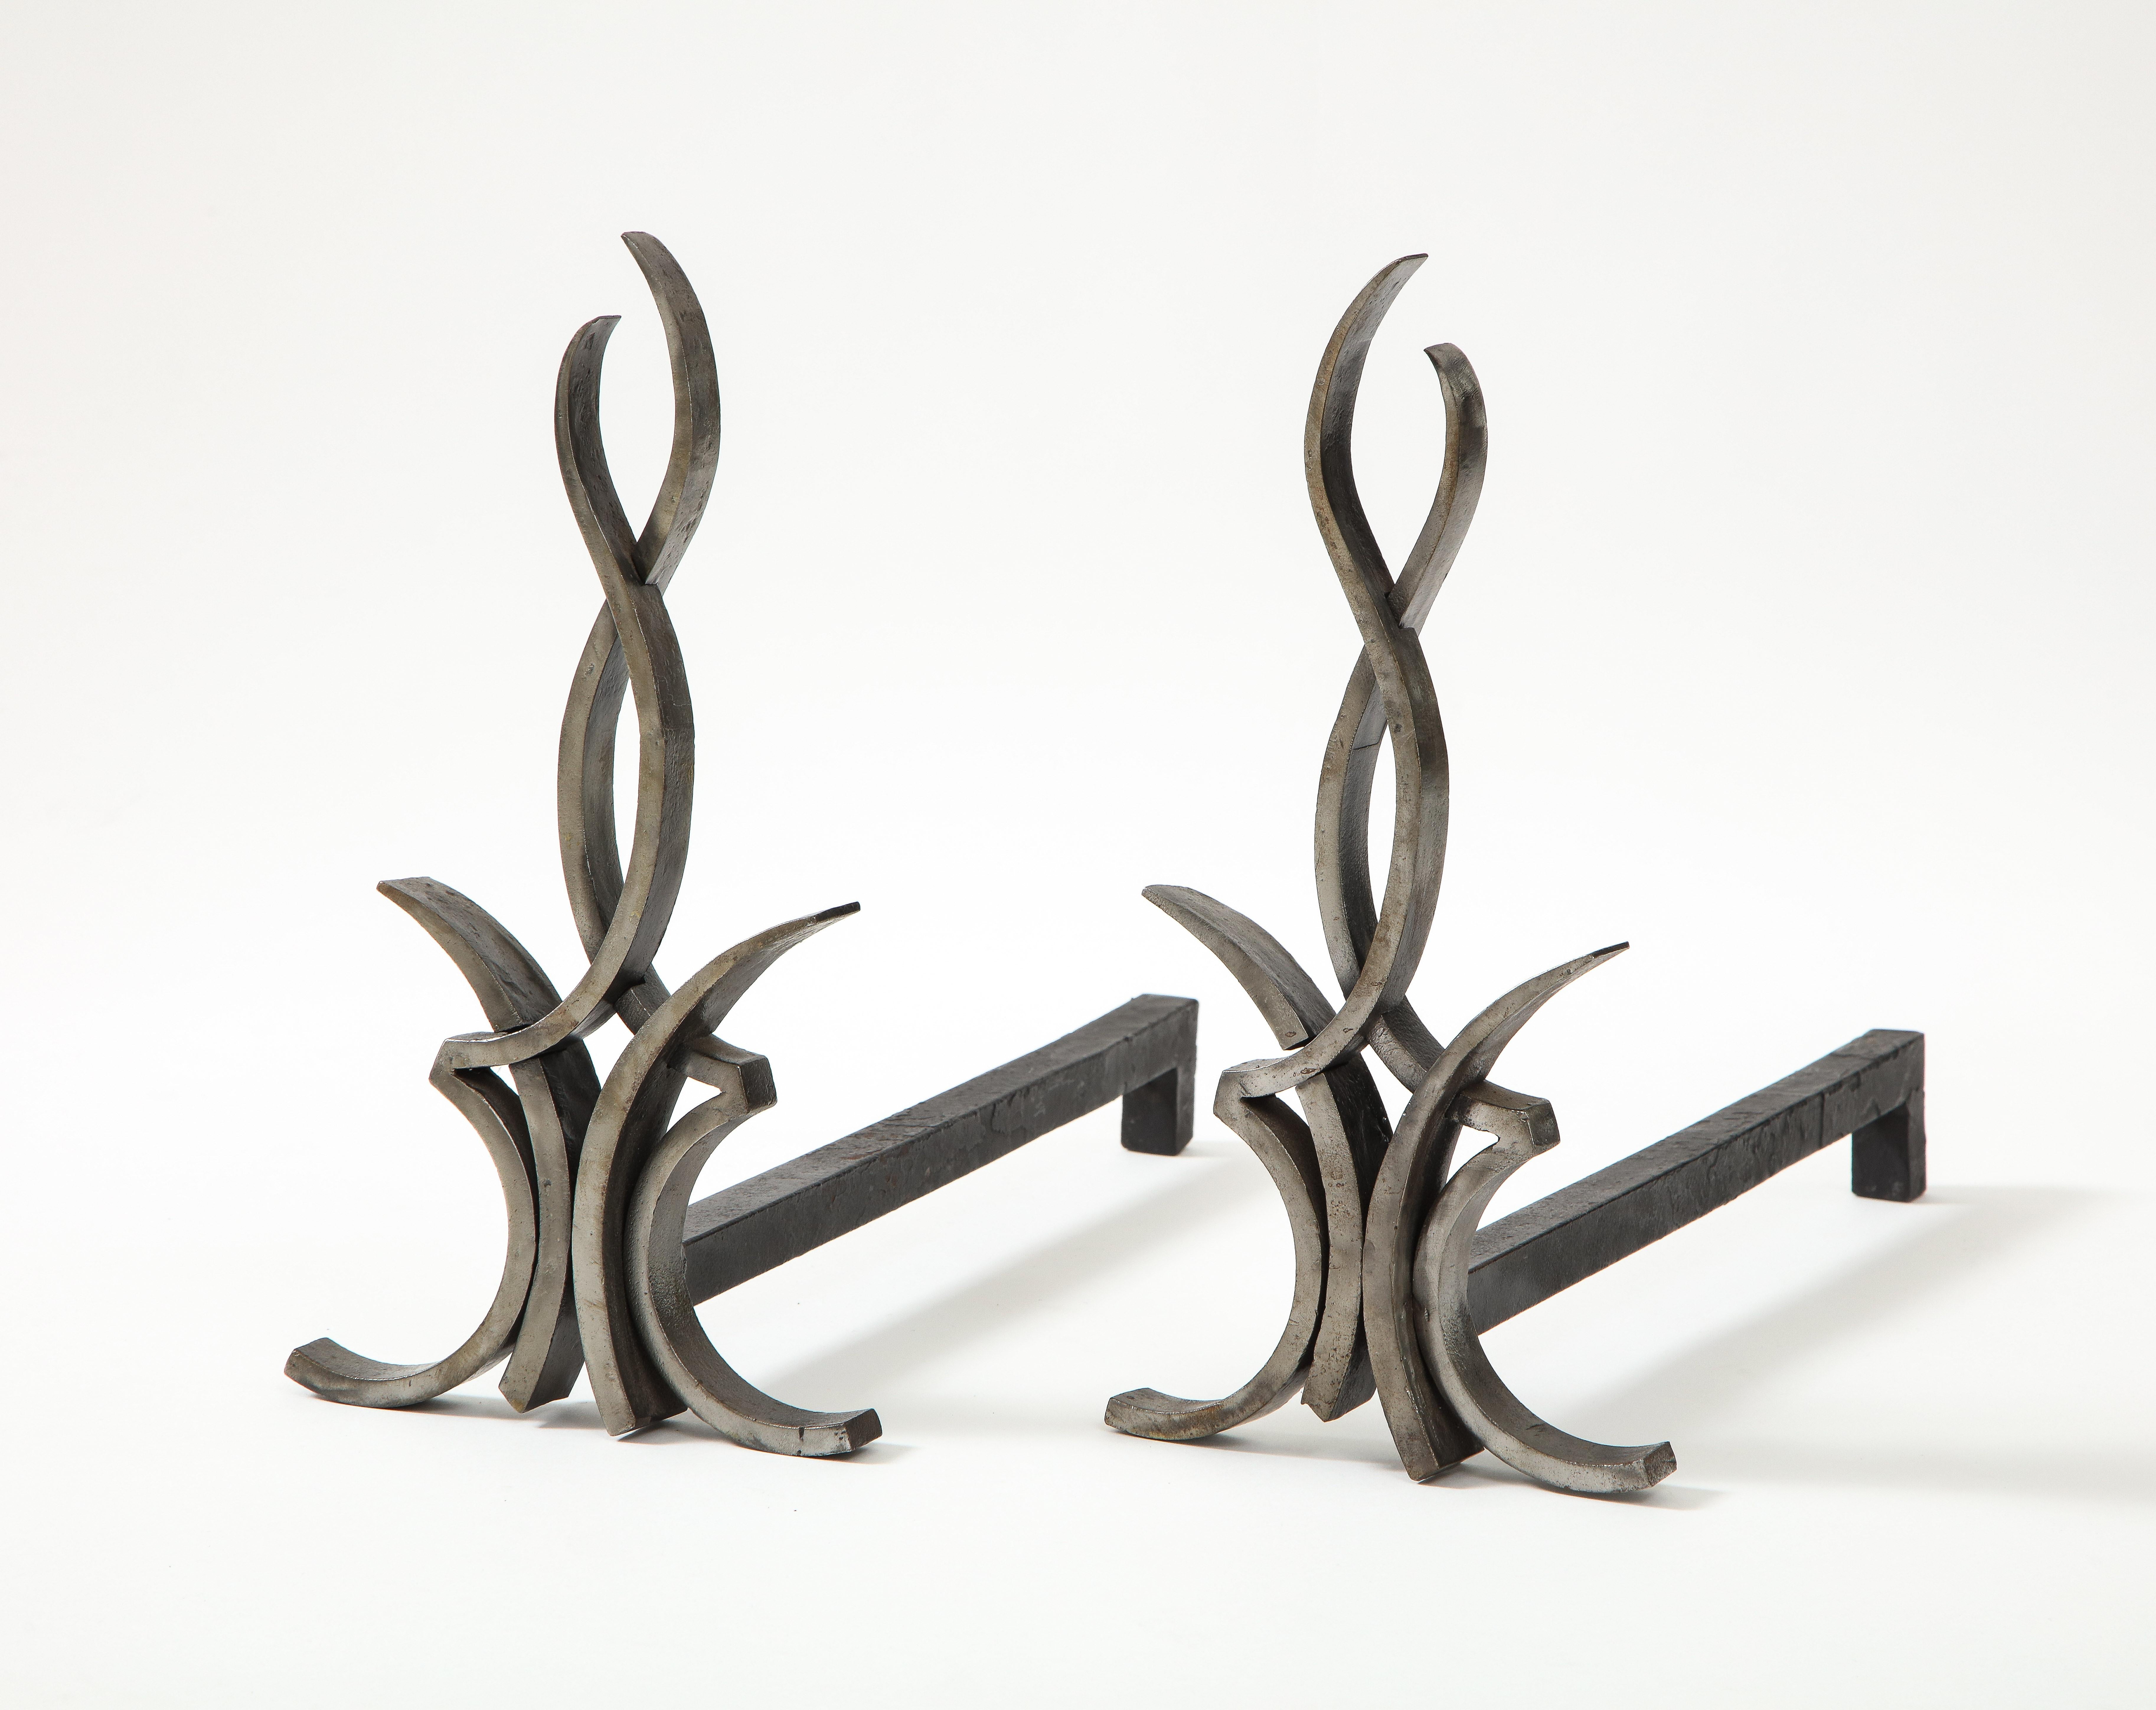 French Art Deco hand forged steel andirons with a stylized flame design, blackened iron backs. Professionally cleaned.